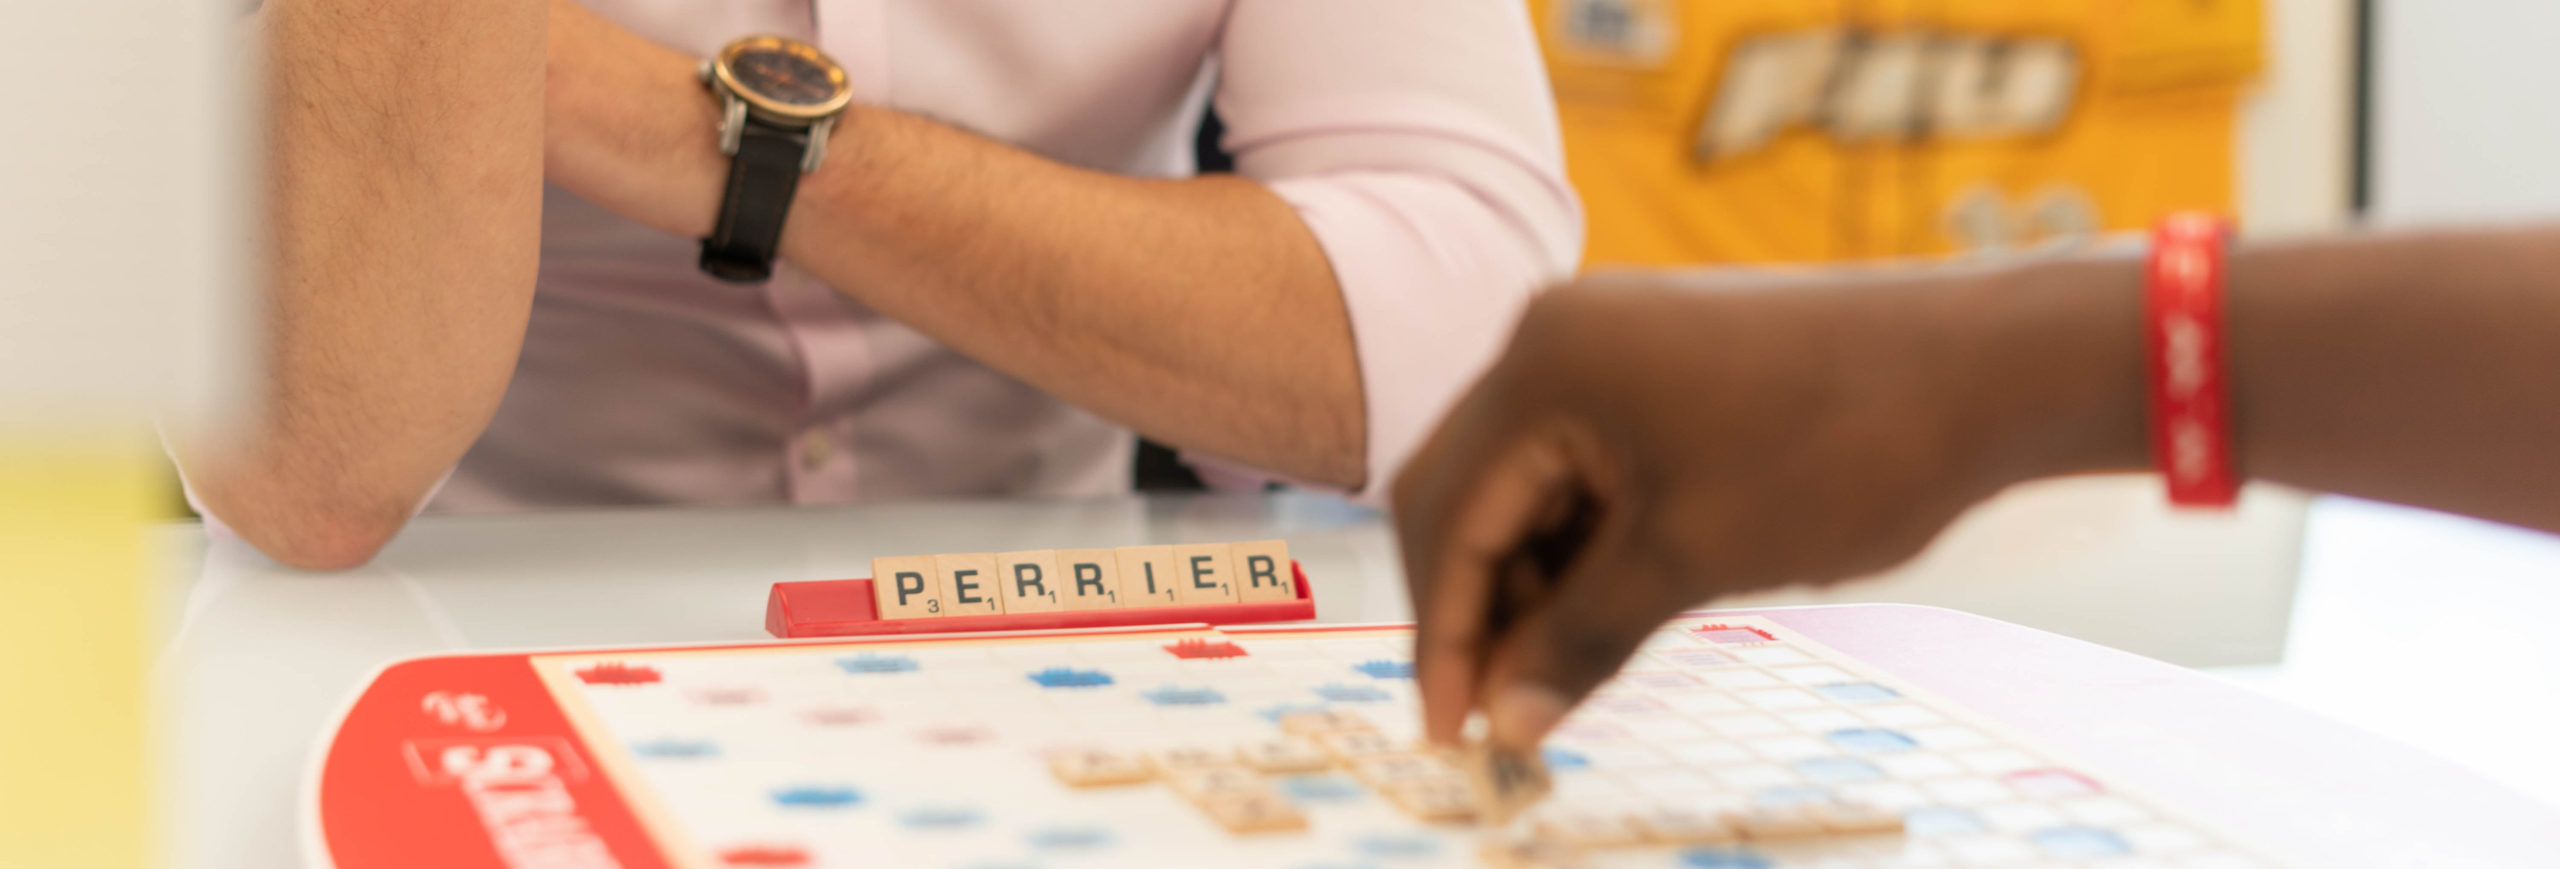 two people sitting at a table playing a word tile game - Game room, game night, john-benitez-_zNgspEPHCI-unsplash - Bill Salvatore, Your Valley Property Team - Arizona Elite Properties 602-999-0952